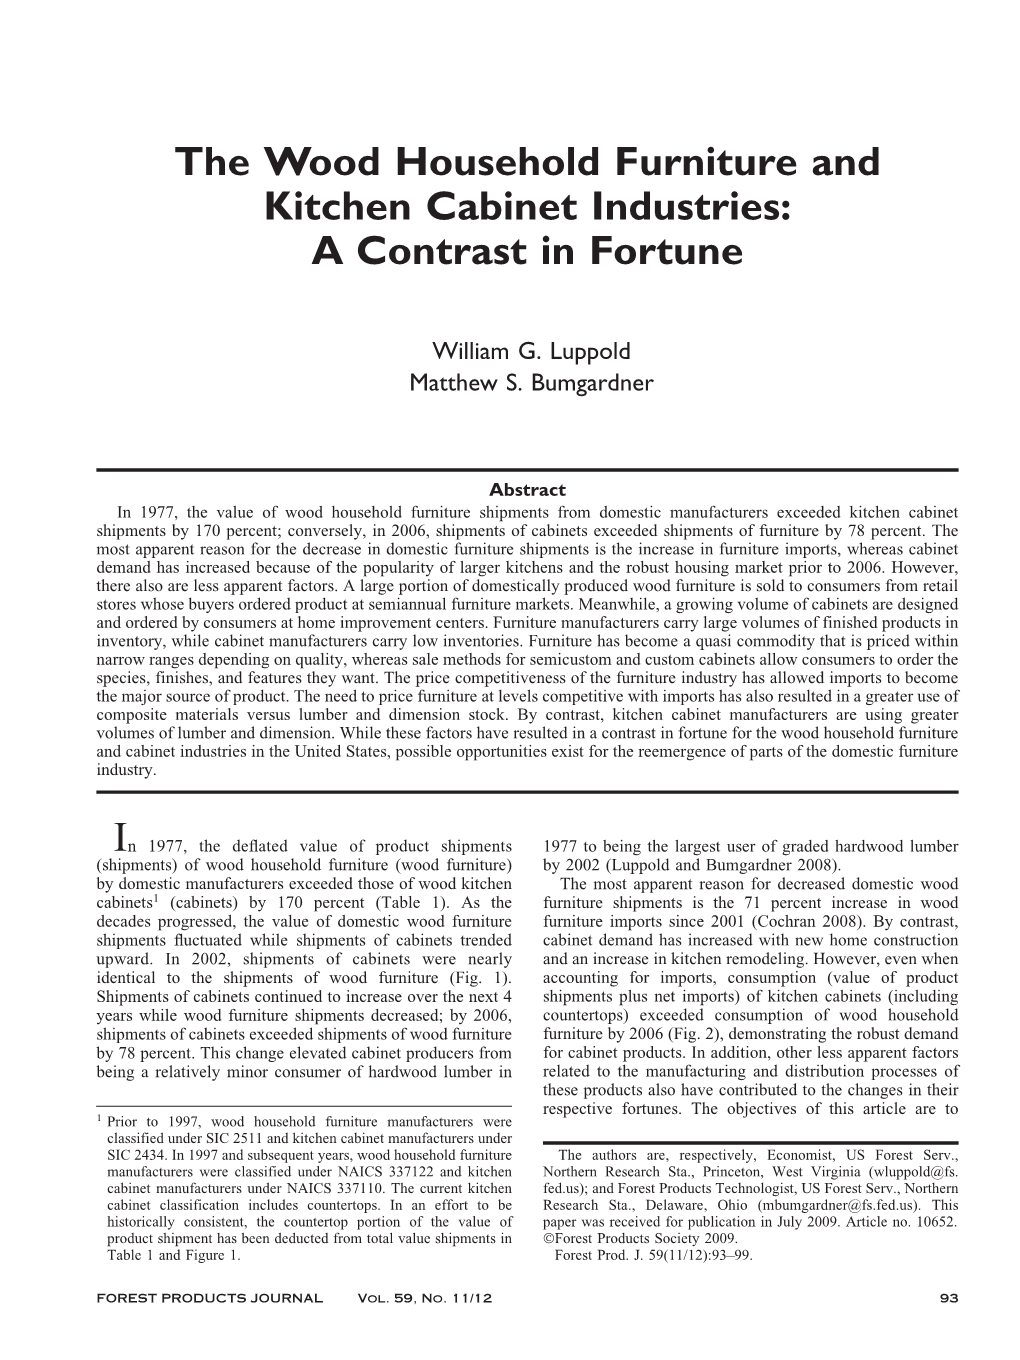 The Wood Household Furniture and Kitchen Cabinet Industries: a Contrast in Fortune